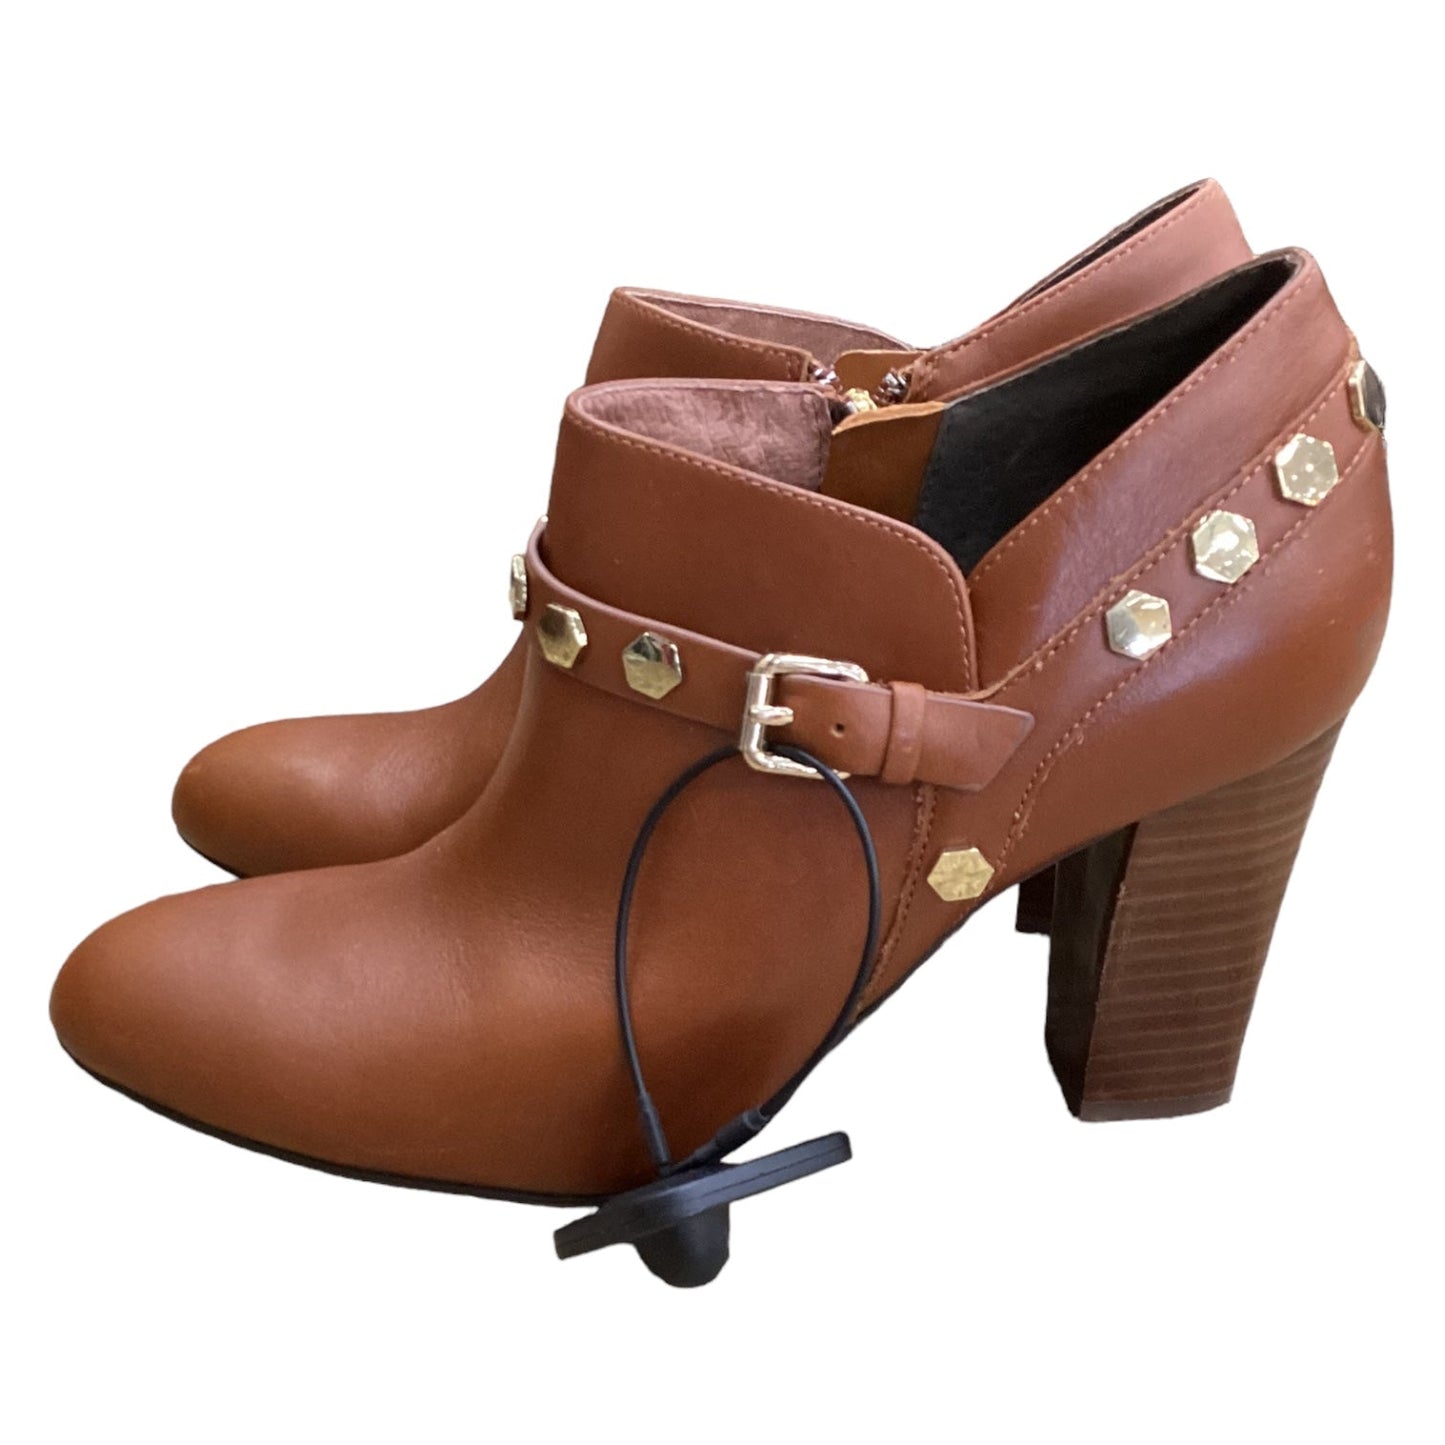 Brown Shoes Heels Block Isola, Size 8.5